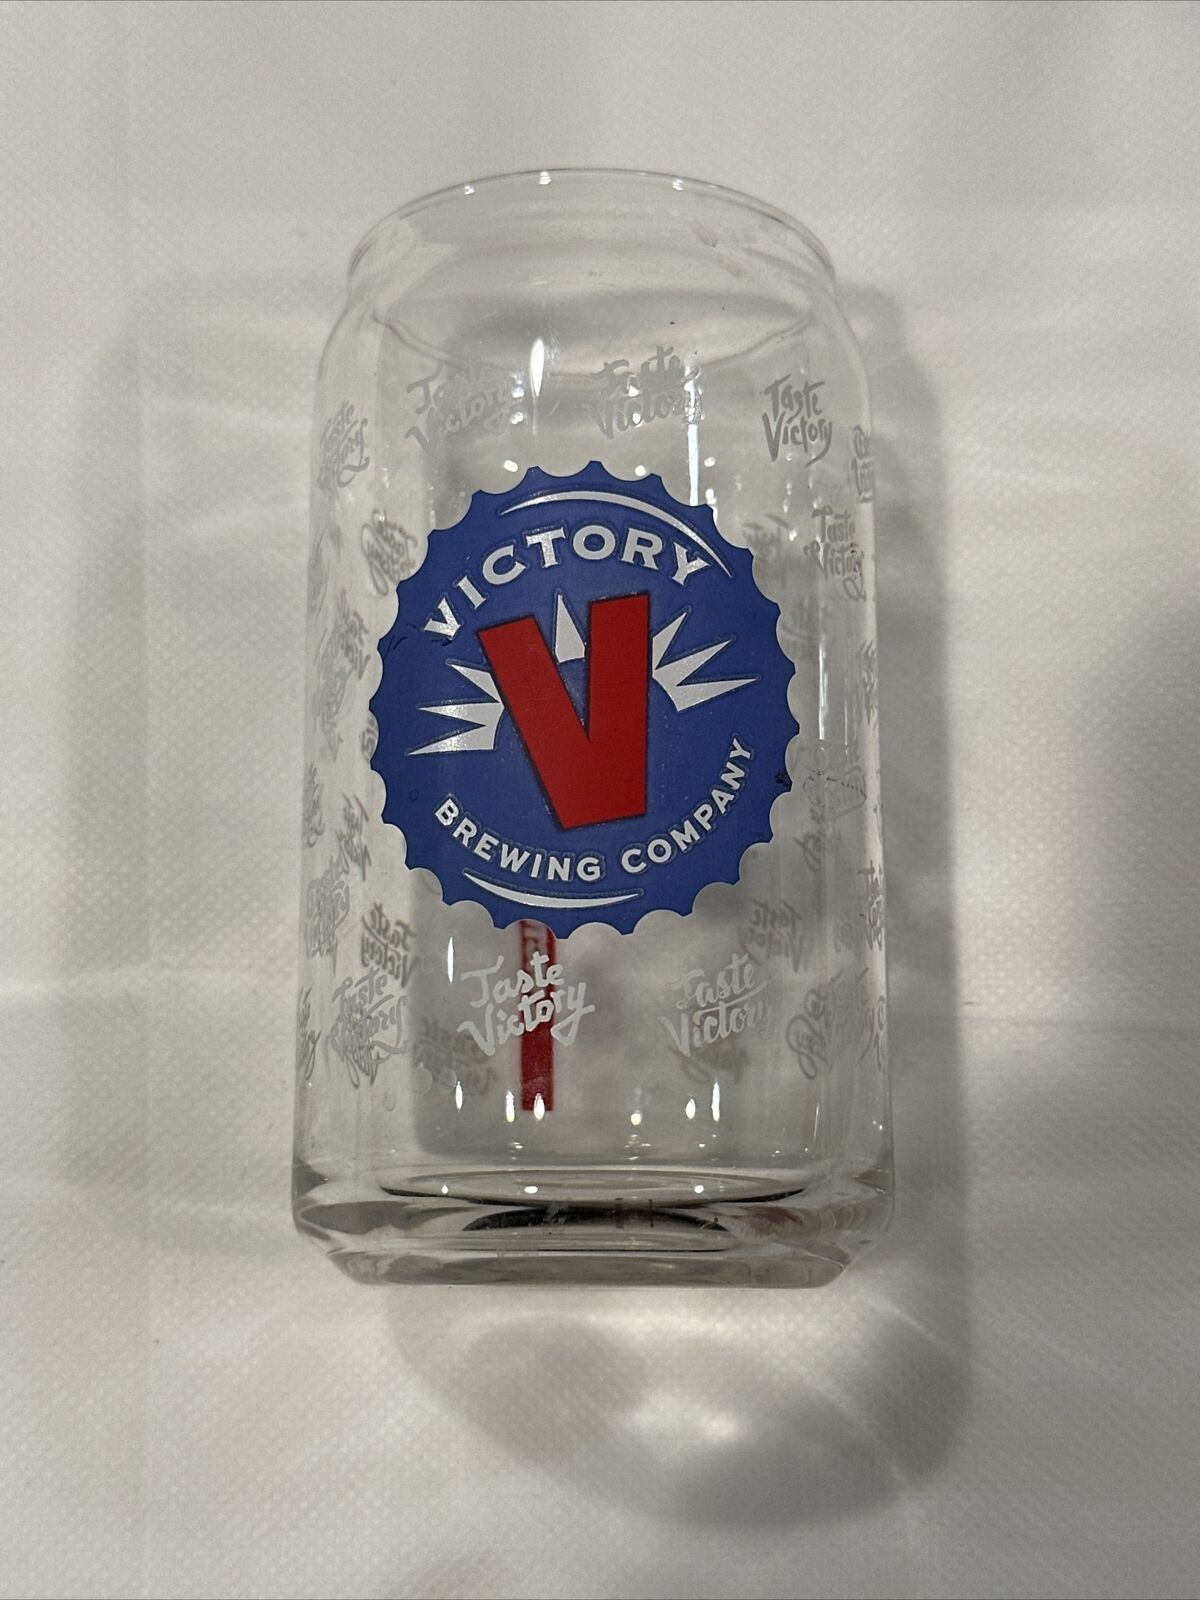 Victory Brewing Company “A Victory For Your Taste” BEER GLASS